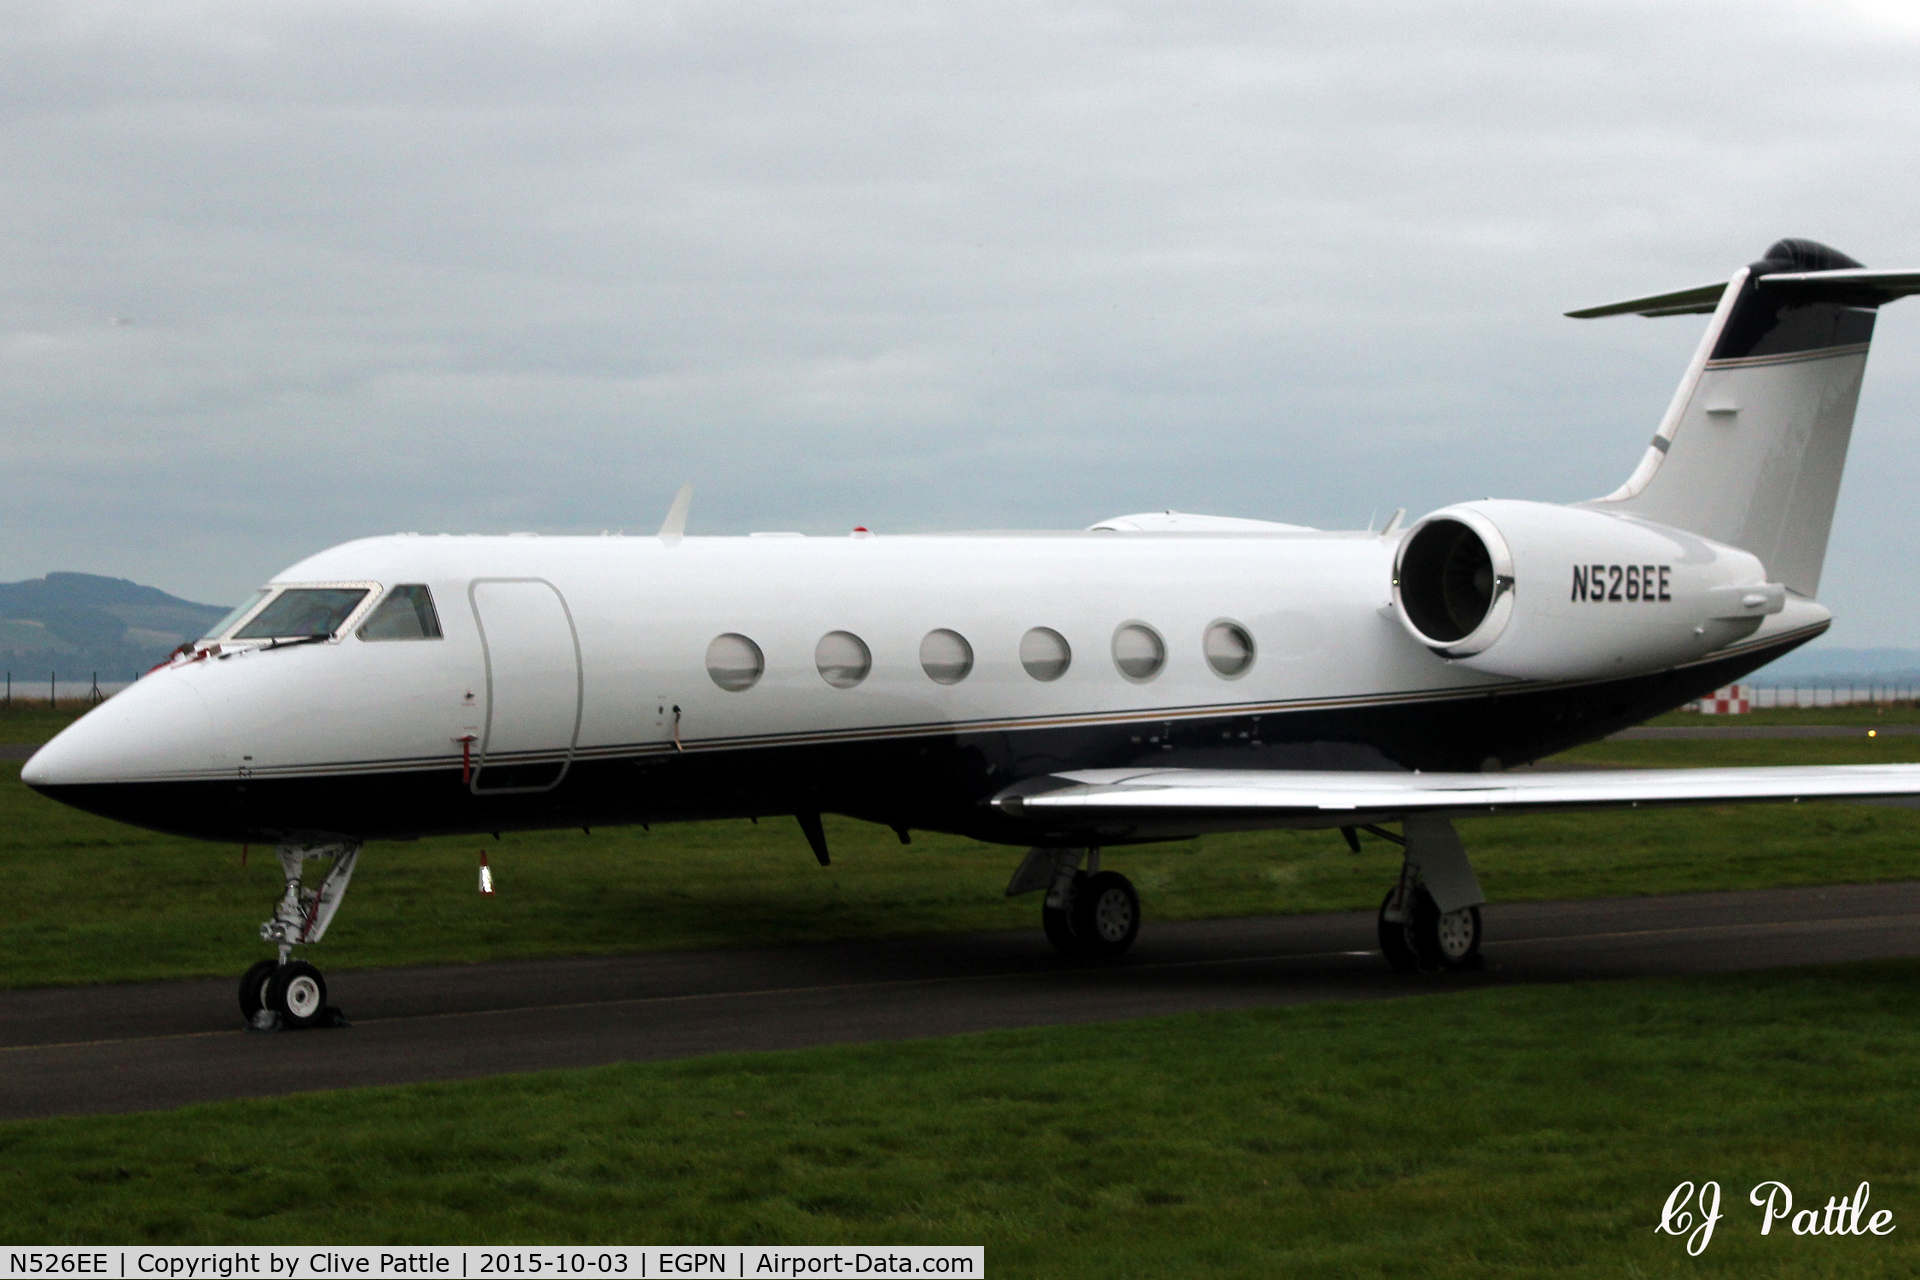 N526EE, 1997 Gulfstream Aerospace G-V C/N 519, Visiting Dundee Riverside Airport EGPD carrying Ernie Els to the nearby Dunhill Golf Championships at St Andrews